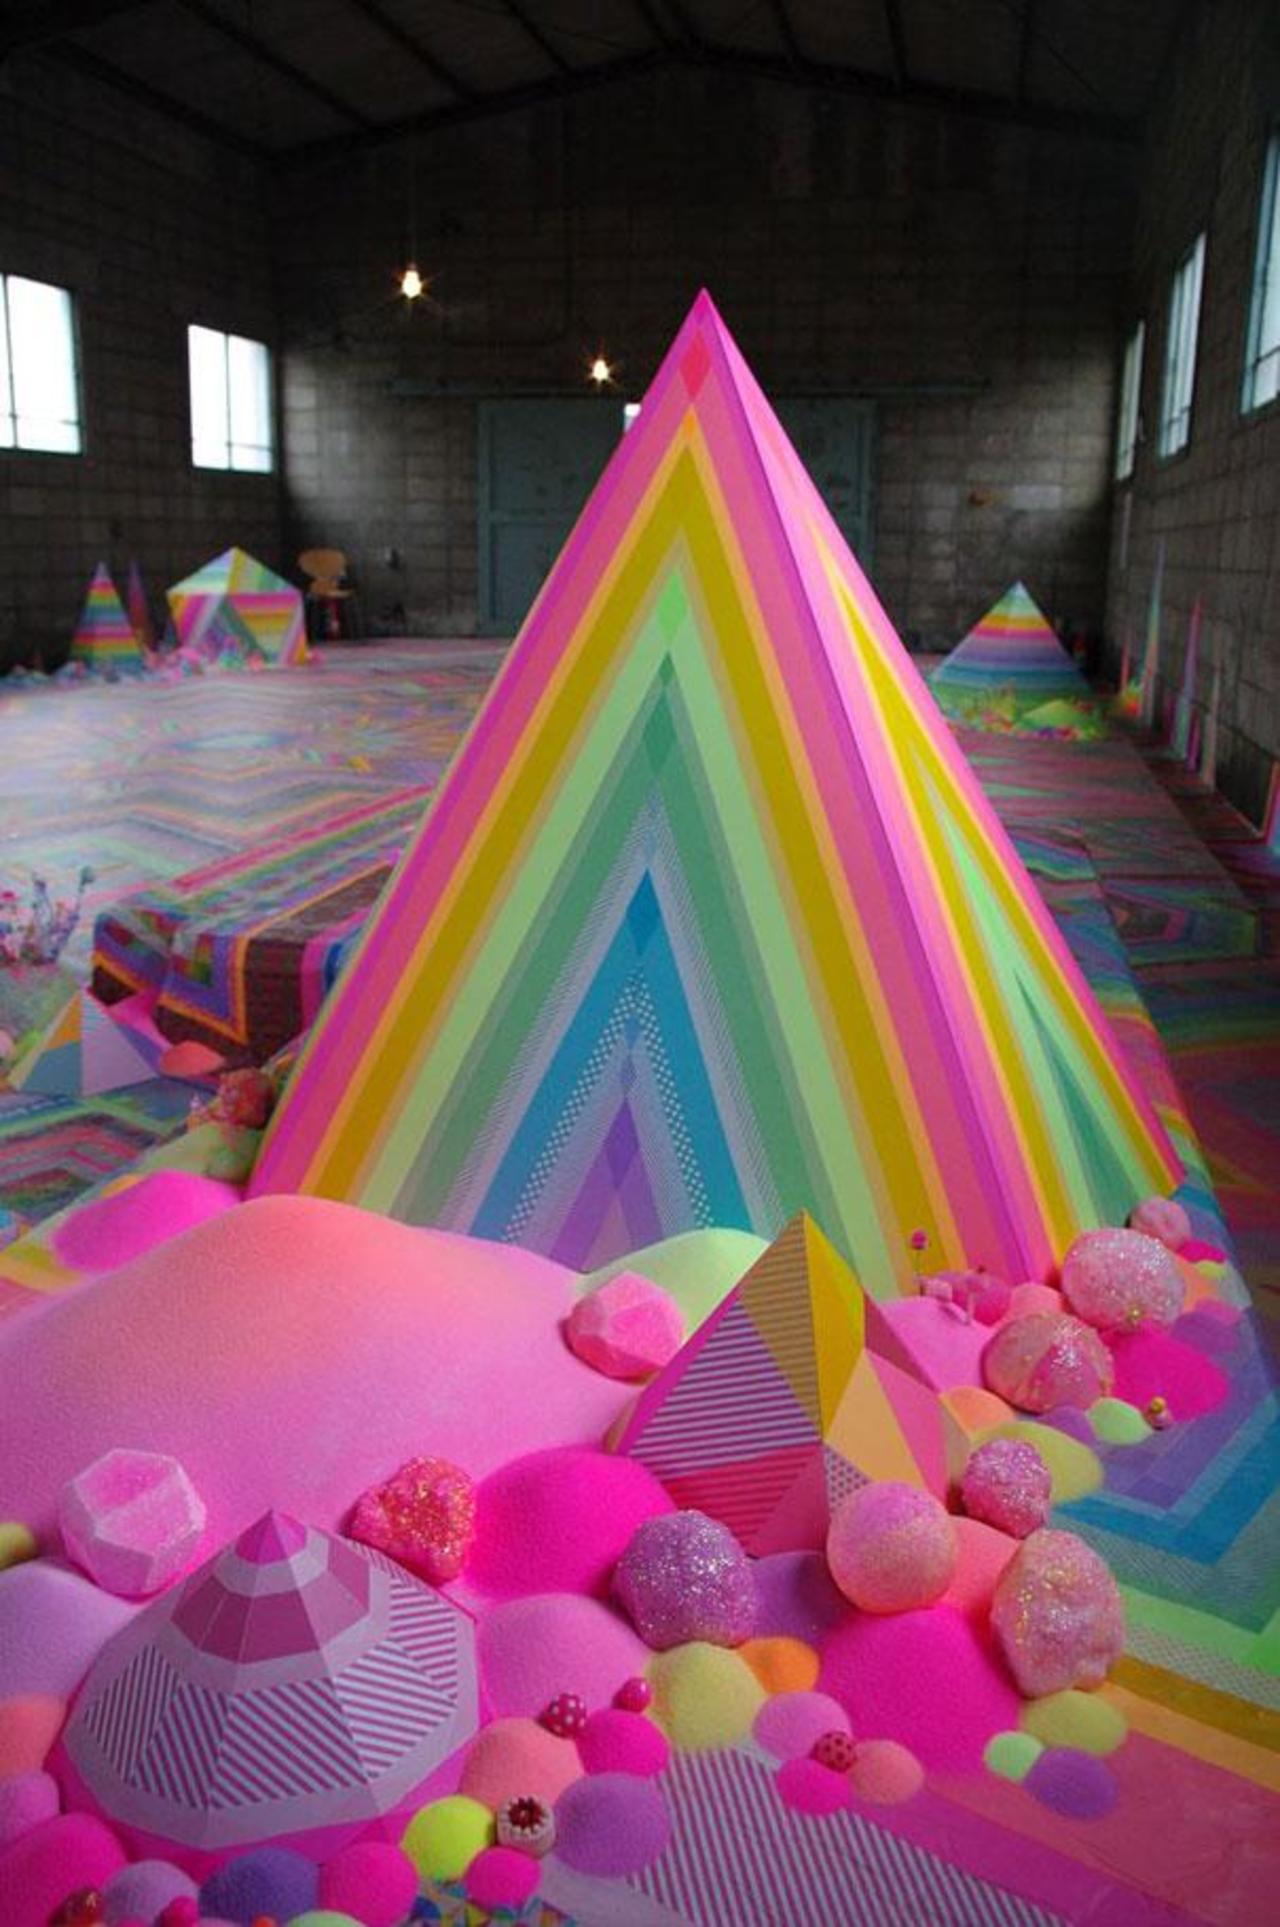 Check out this art installation made out of mostly sweets! #art #candy #yum http://bit.ly/1Cc63Y7 http://t.co/A03yFLldrv